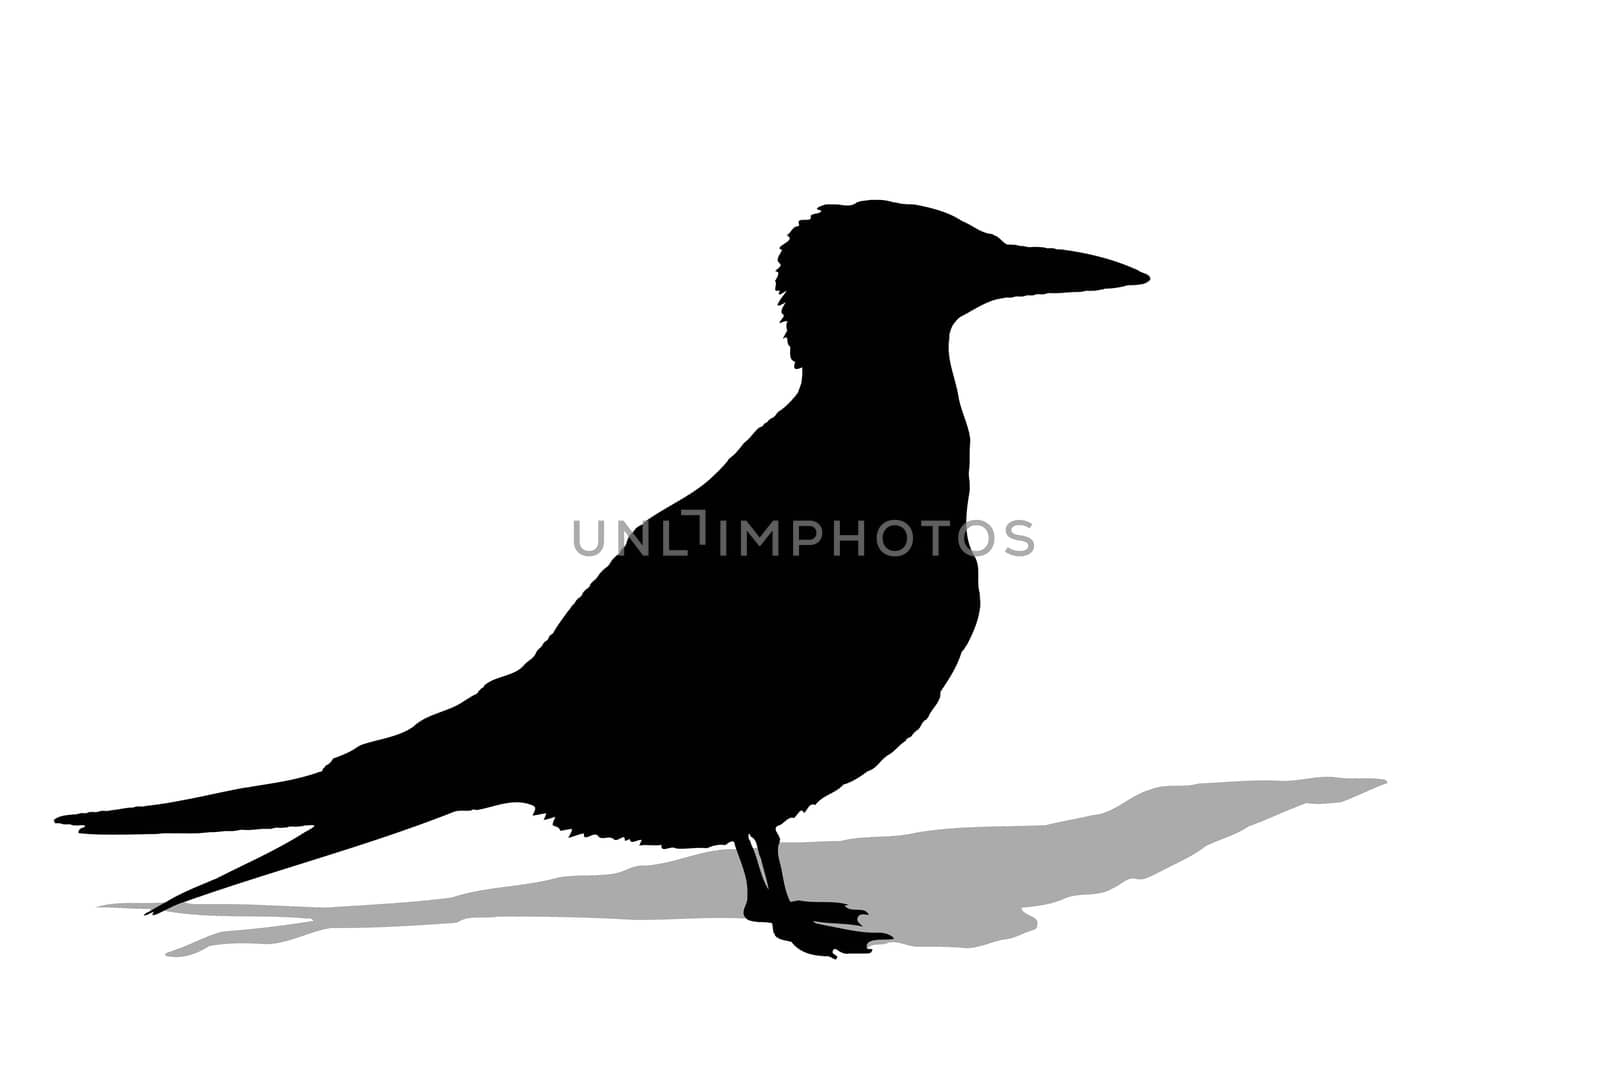 Seagull silhouette with shadow, isolated on white background.